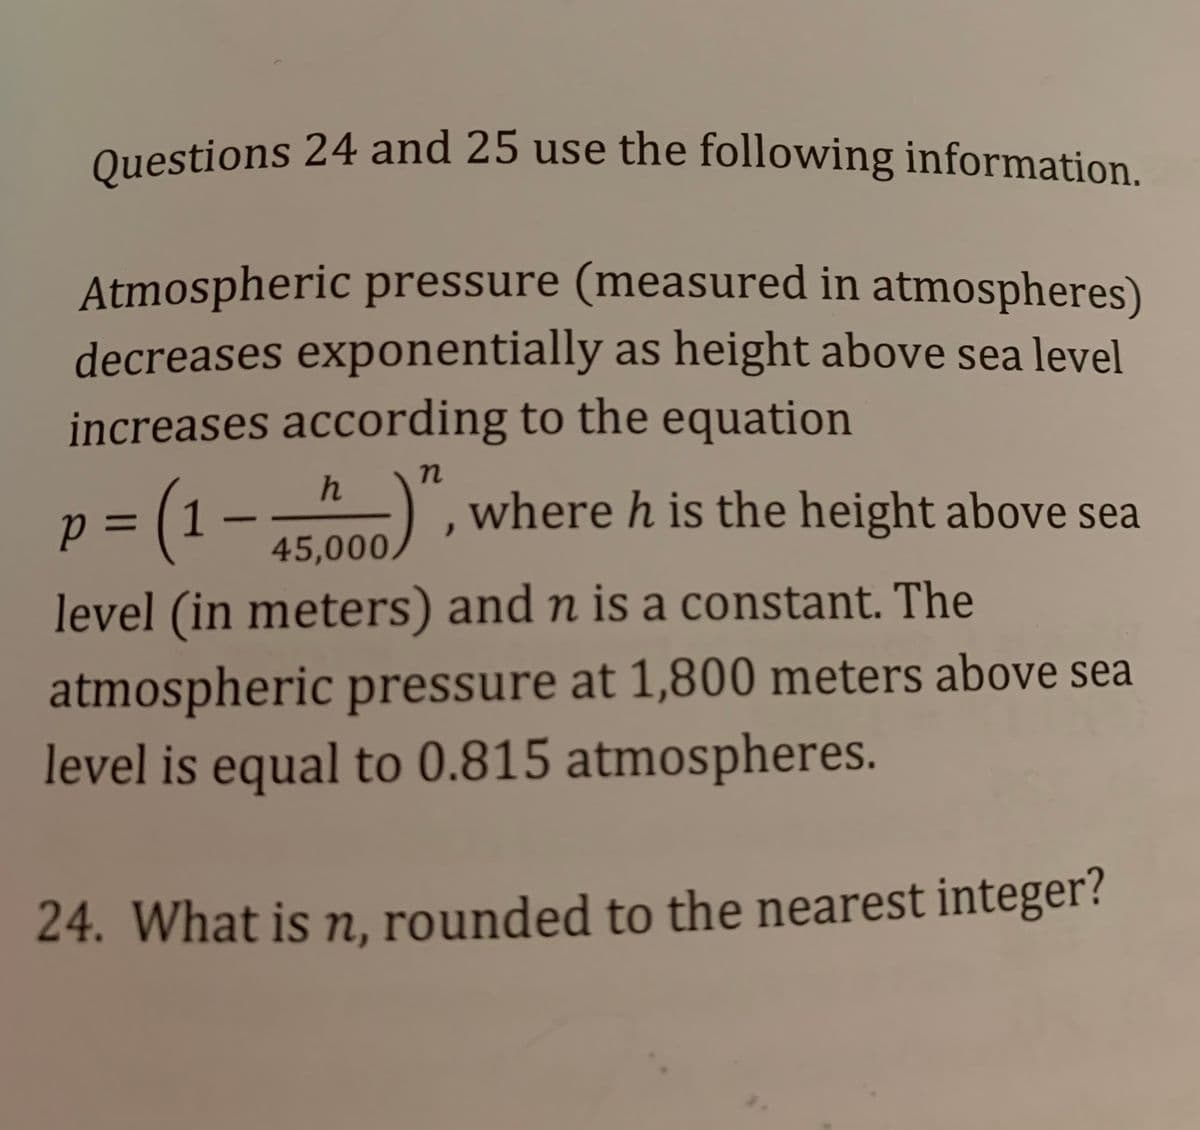 Questions 24 and 25 use the following information.
Questions 24 and 25 use the following information.
Atmospheric pressure (measured in atmospheres)
decreases exponentially as height above sea level
increases according to the equation
h
p =D [1
TE 000), where h is the height above sea
%3D
45,000,
level (in meters) and n is a constant. The
atmospheric pressure at 1,800 meters above sea
level is equal to 0.815 atmospheres.
24. What is n, rounded to the nearest integer?
